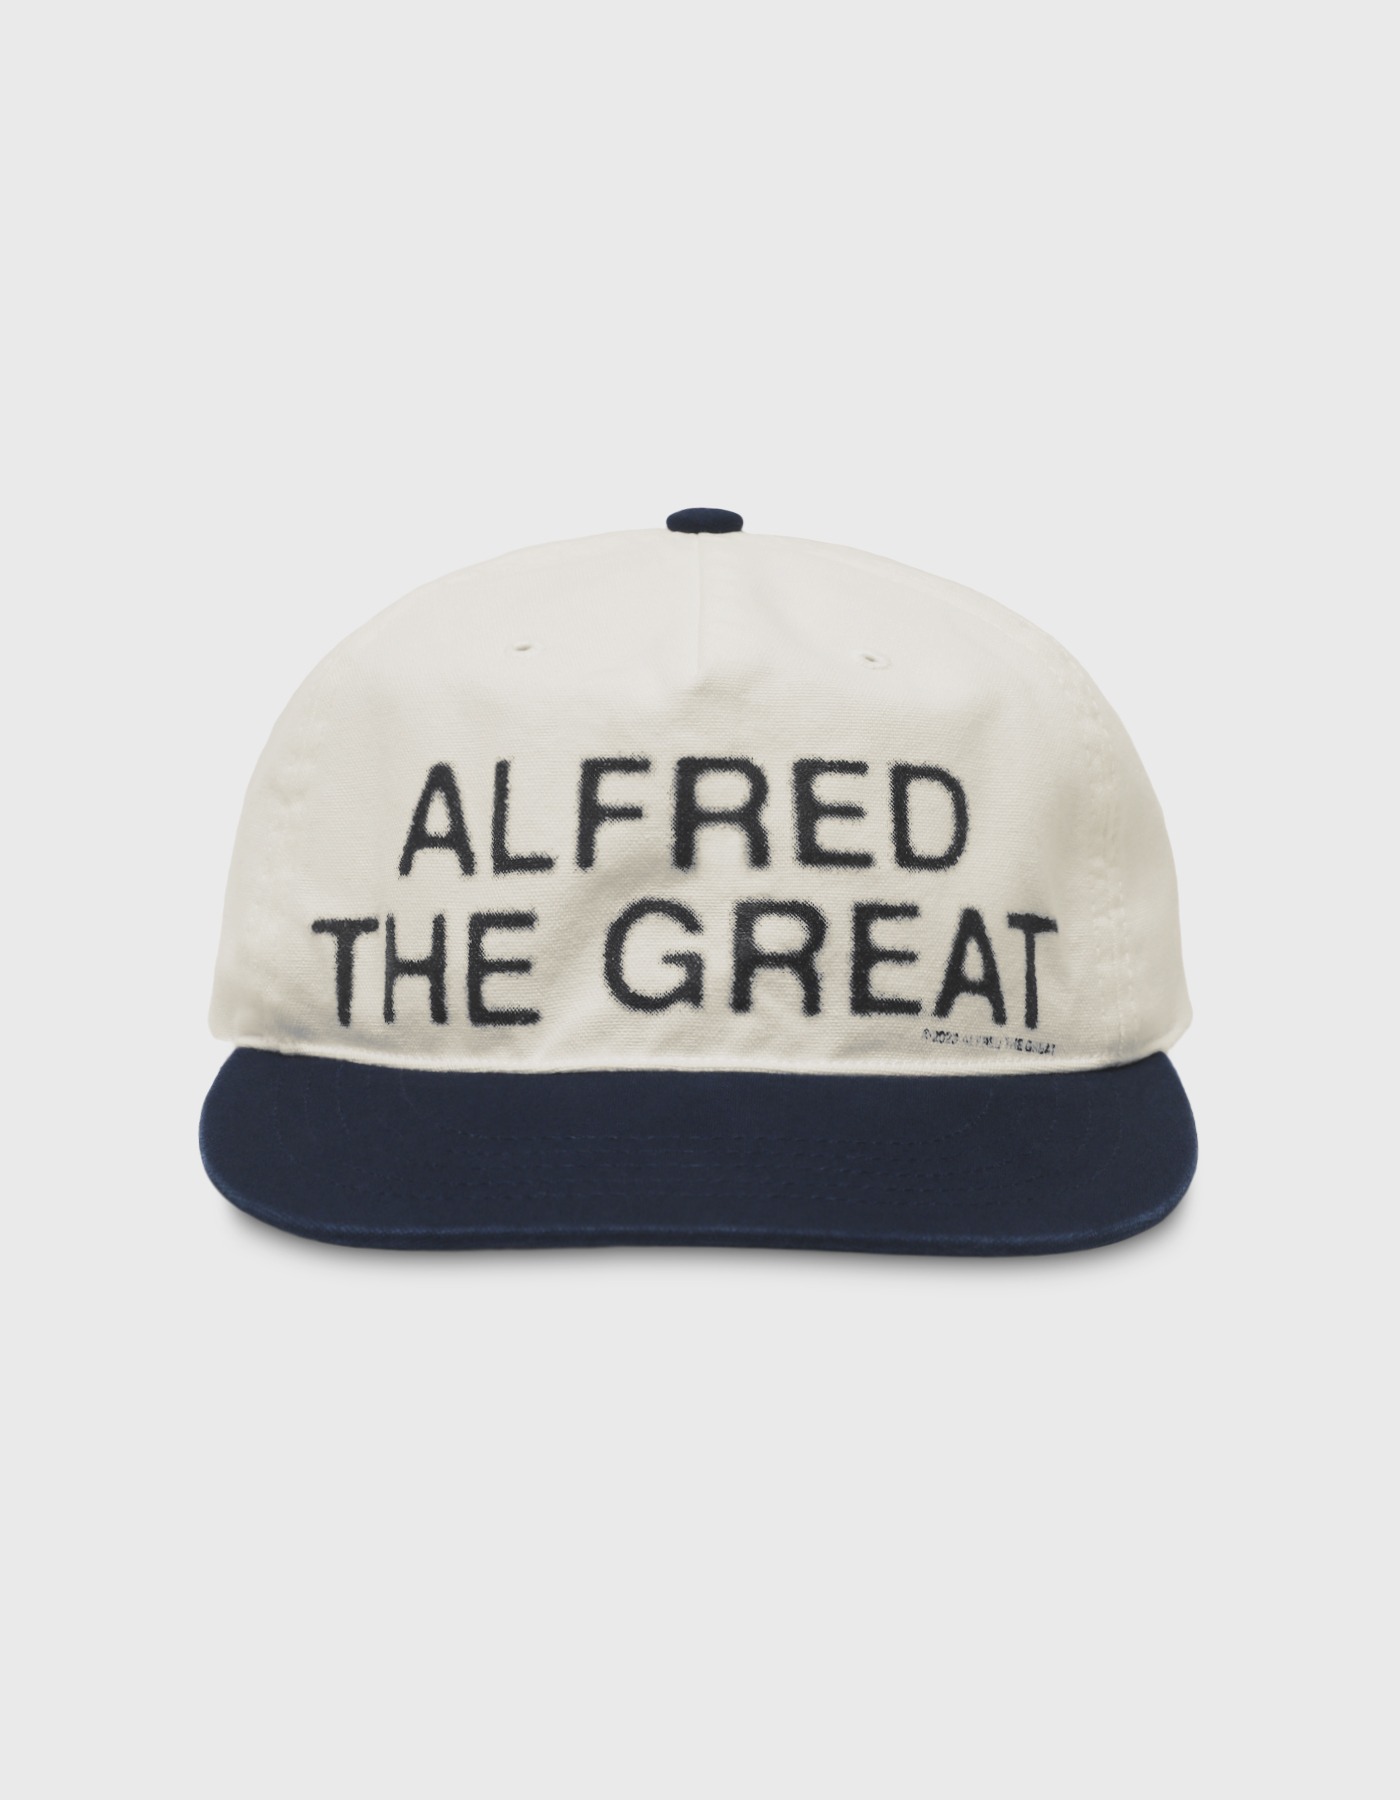 FRED THE GREAT STENCIL CAP / White-Navy